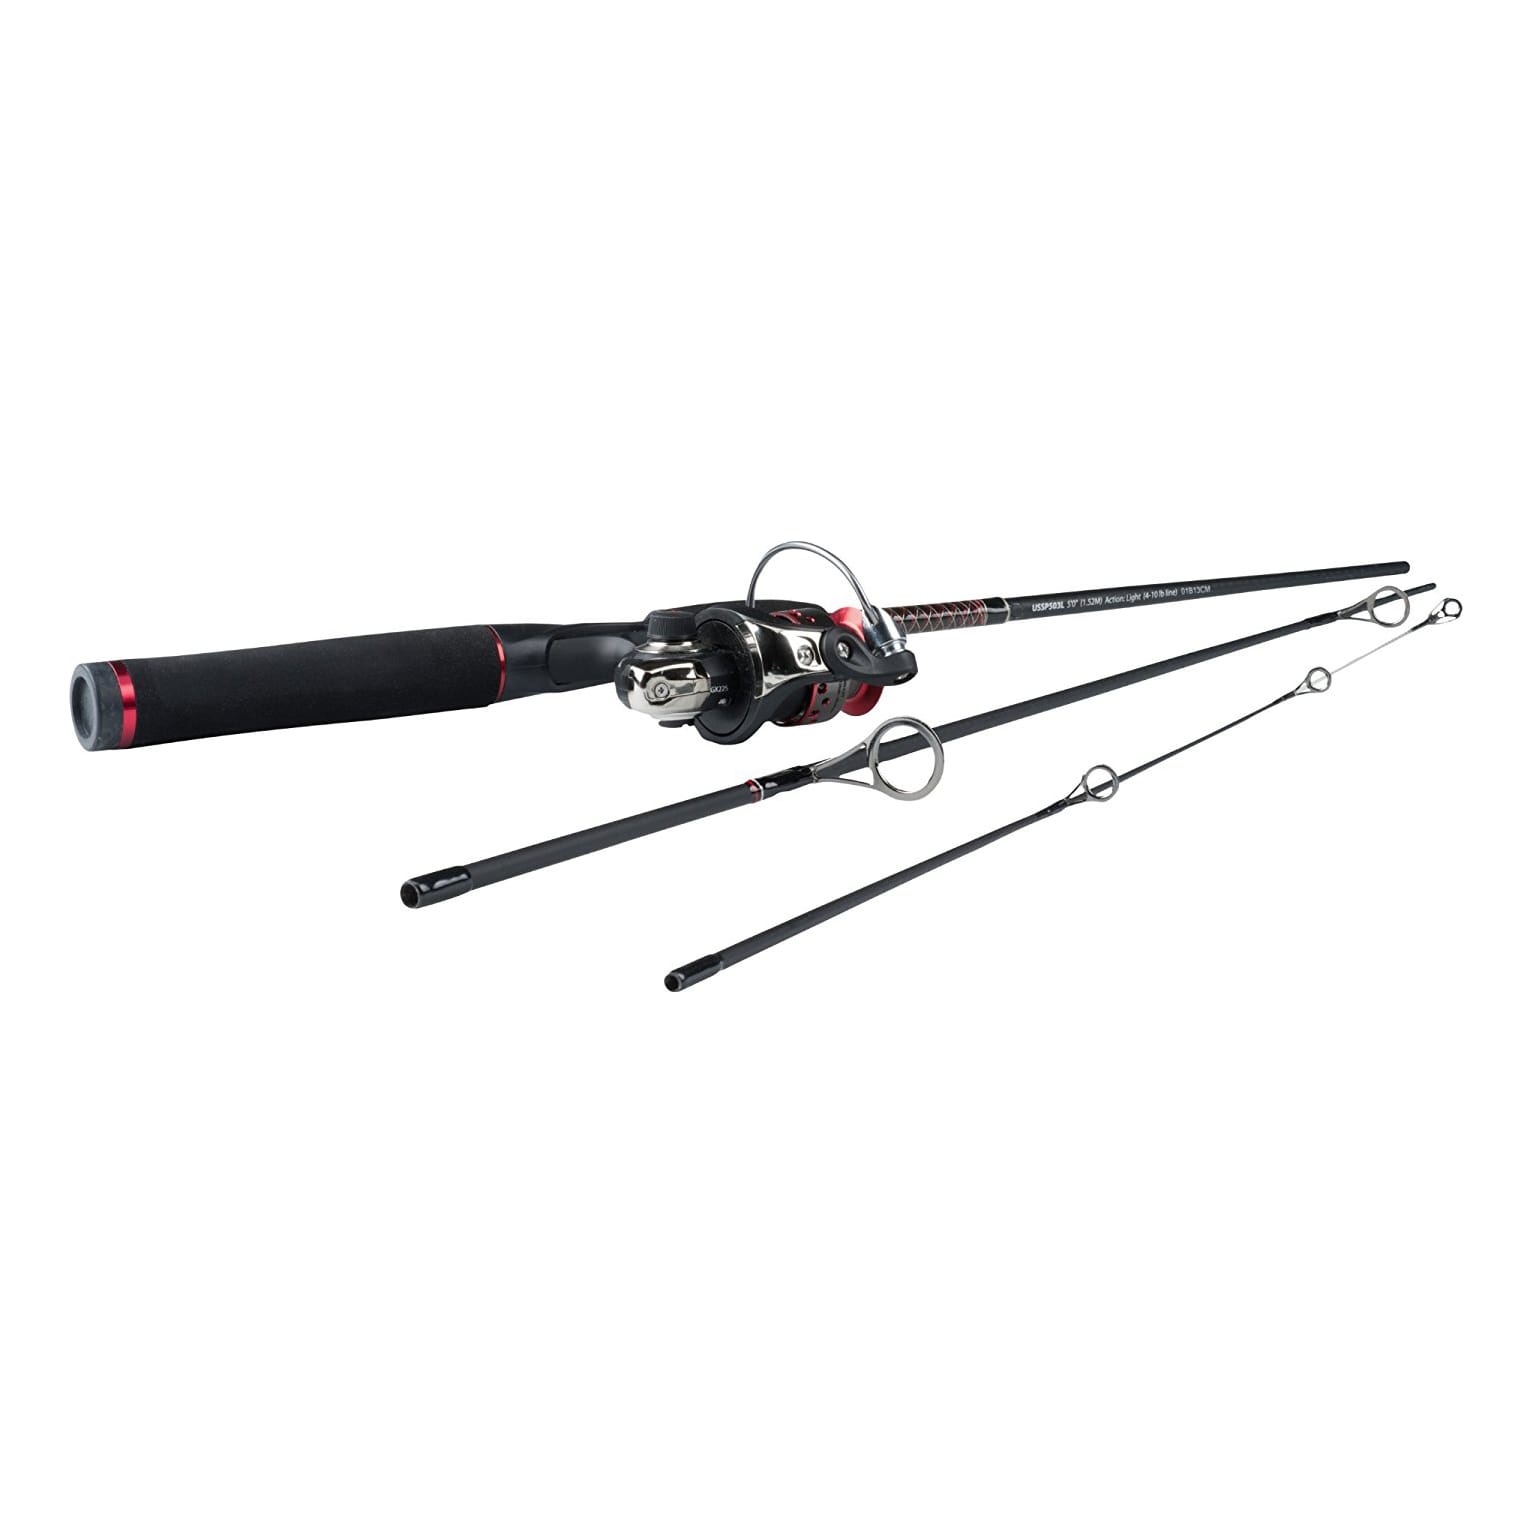 6'6” Ugly Stik 6'6” GX2 Spinning Fishing Rod and Reel Spinning Combo